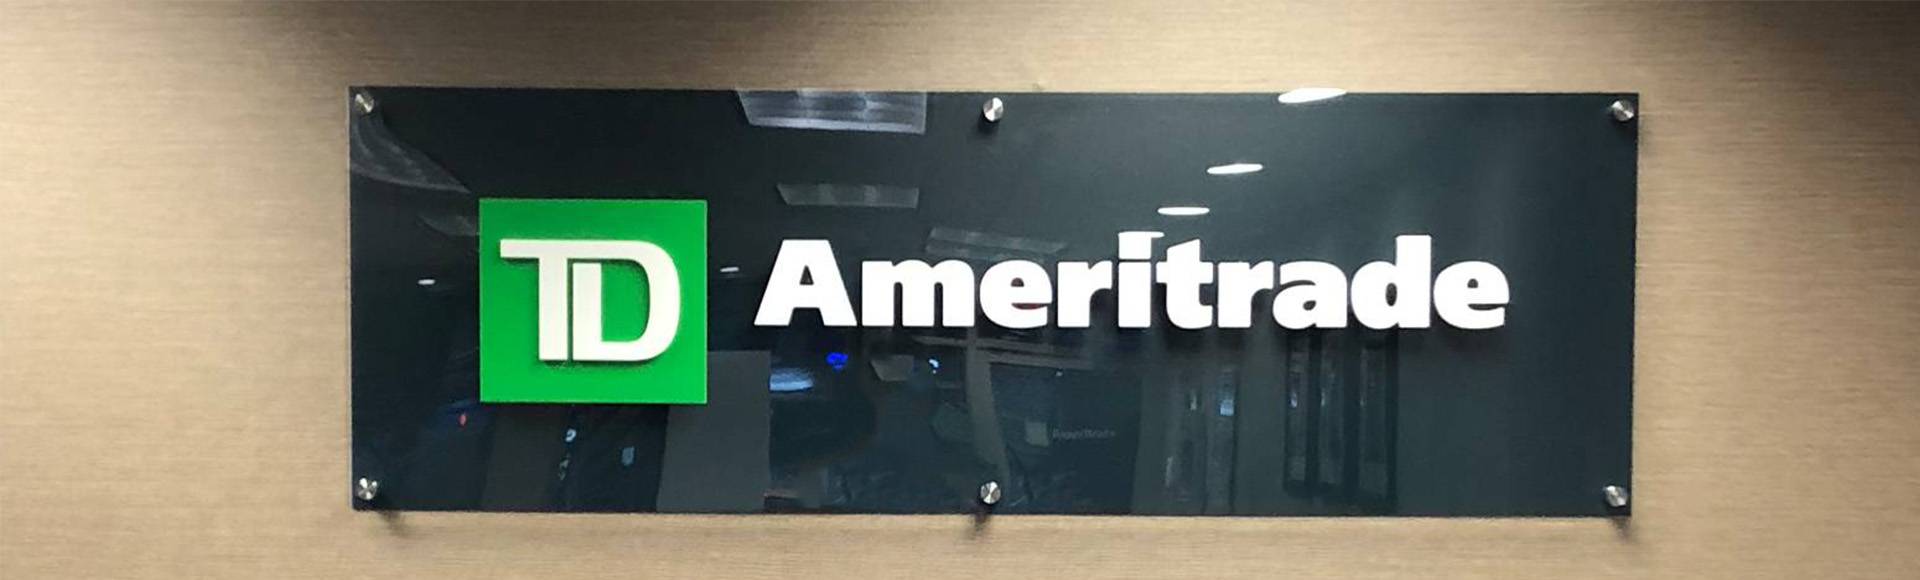 We are a full-service signage company providing holistic sign solutions for banks, brokerages, and other financial agencies in NJ and the NYC metro area.